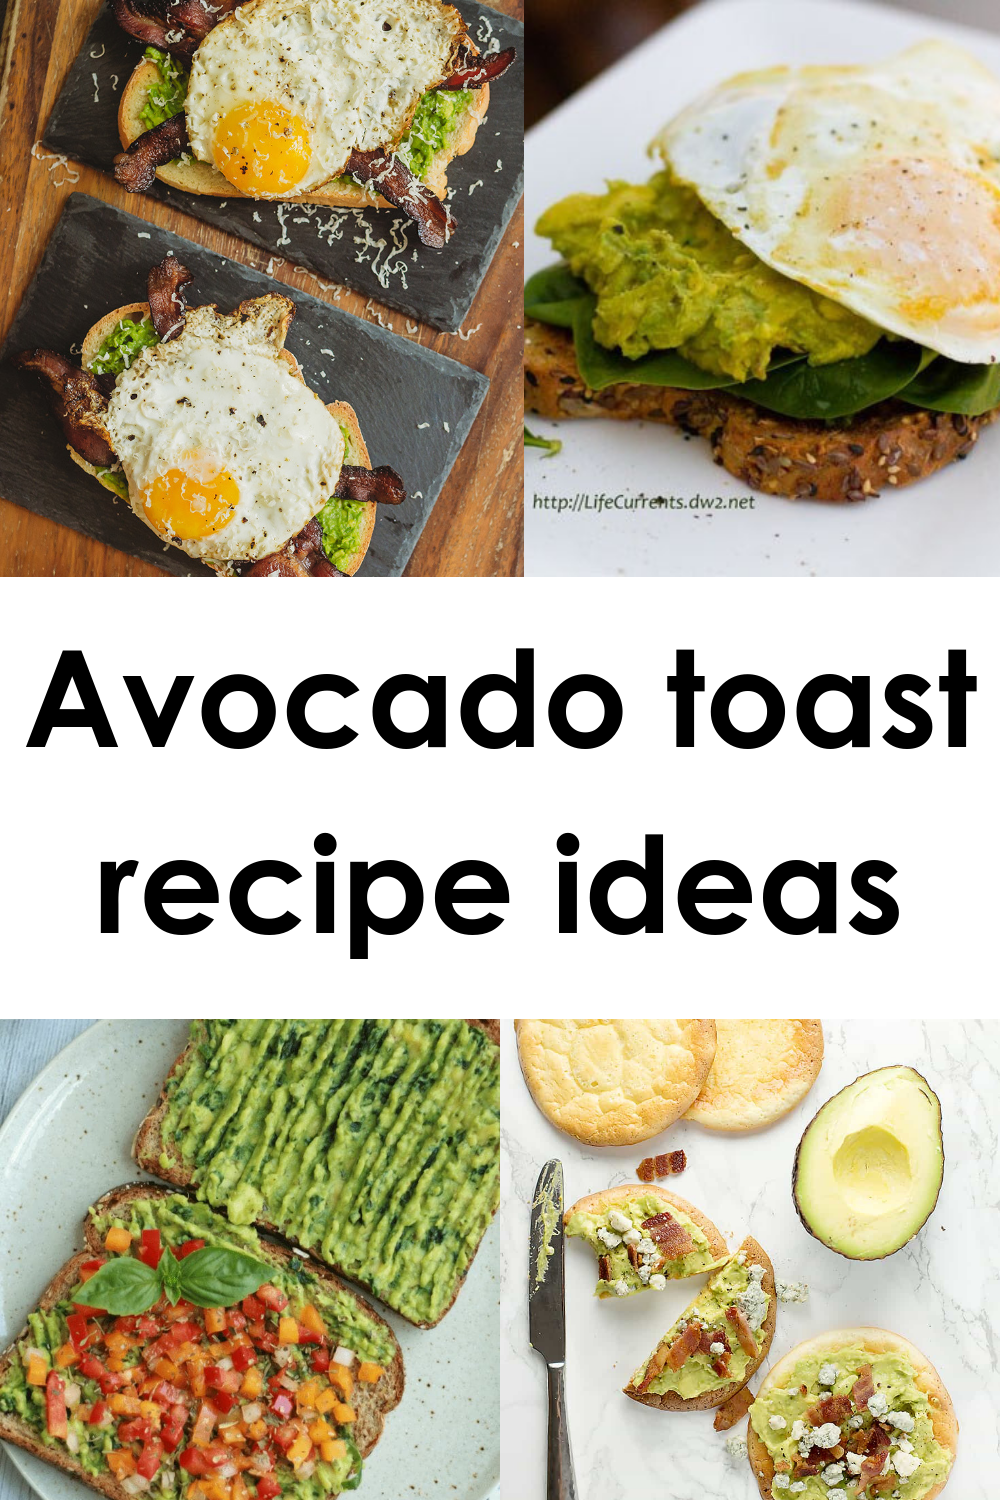 Here is an article with 15 best simple, avocado toast ideas some have eggs, others are vegan, clean eating, #avocadotoast #toast #avocado #food #lunch #dinner #breakfastideas 